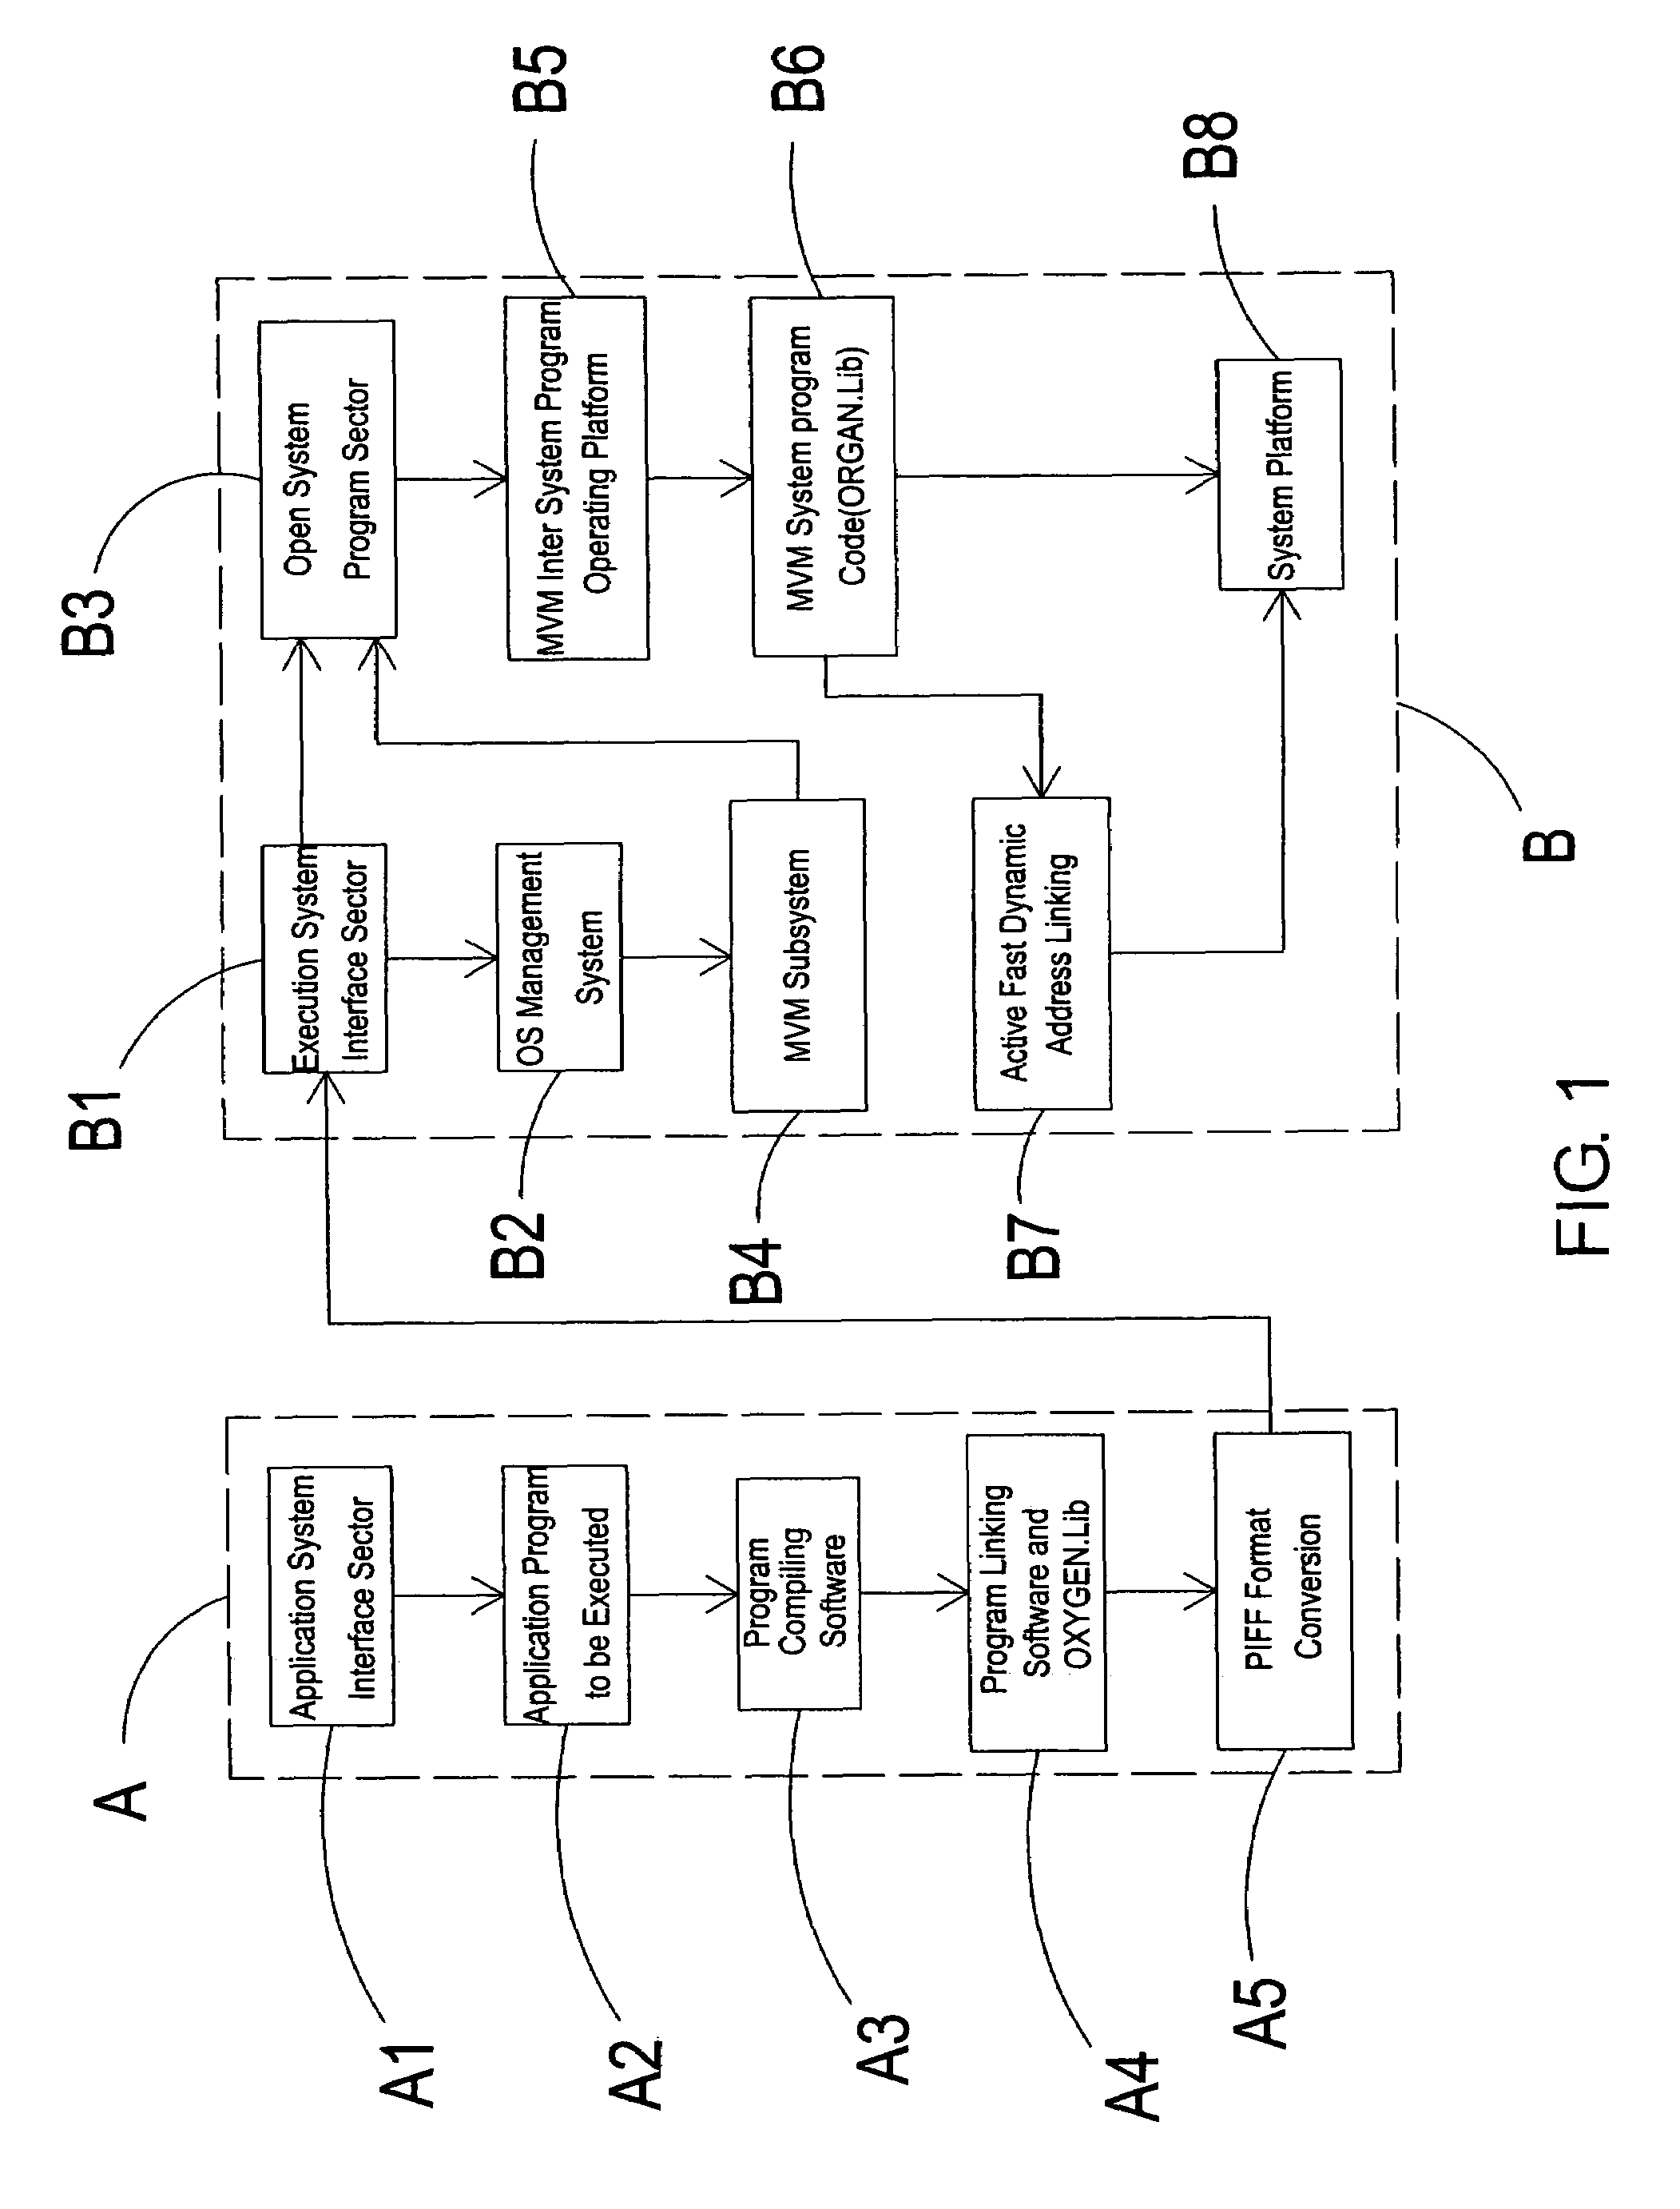 Architecture and method of a cellular phone embedded system